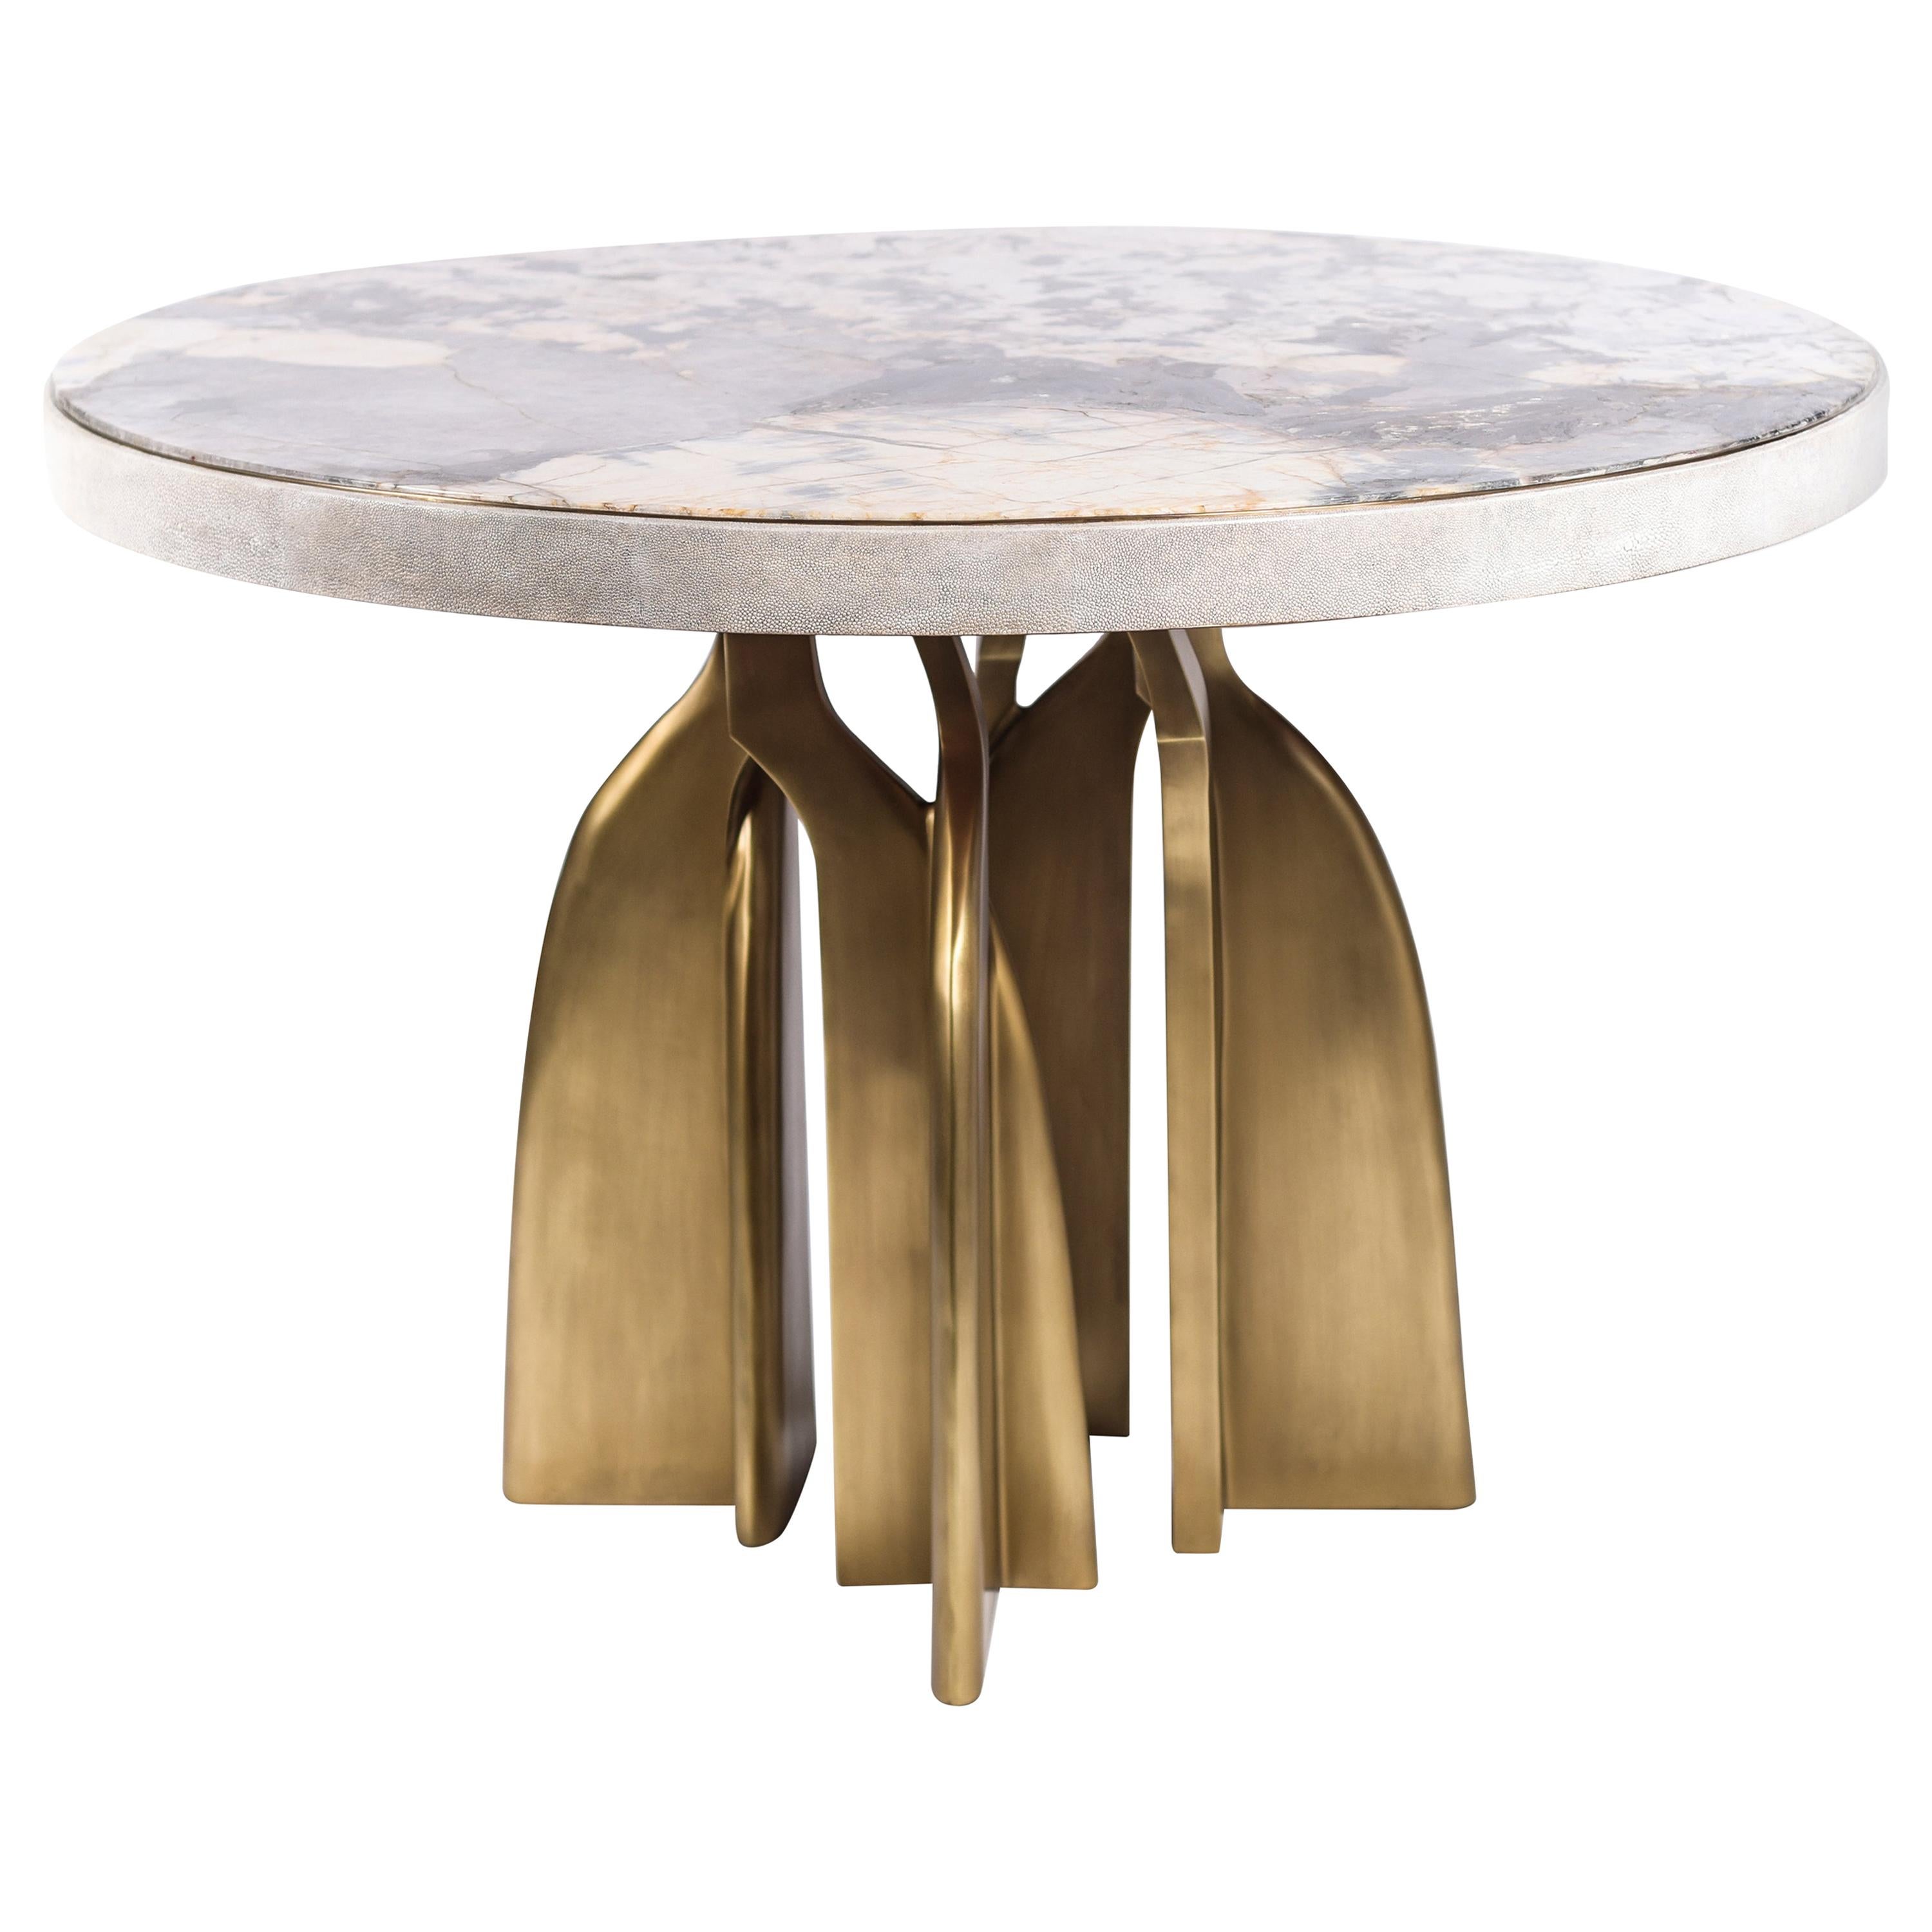 The Chital breakfast table is a stunning piece, a statement in any space. The onyx stone inlaid top is stunning and one of a kind. The semi-precious stone has beautiful color tonalities and silver inserts. The side border of the top is inlaid in